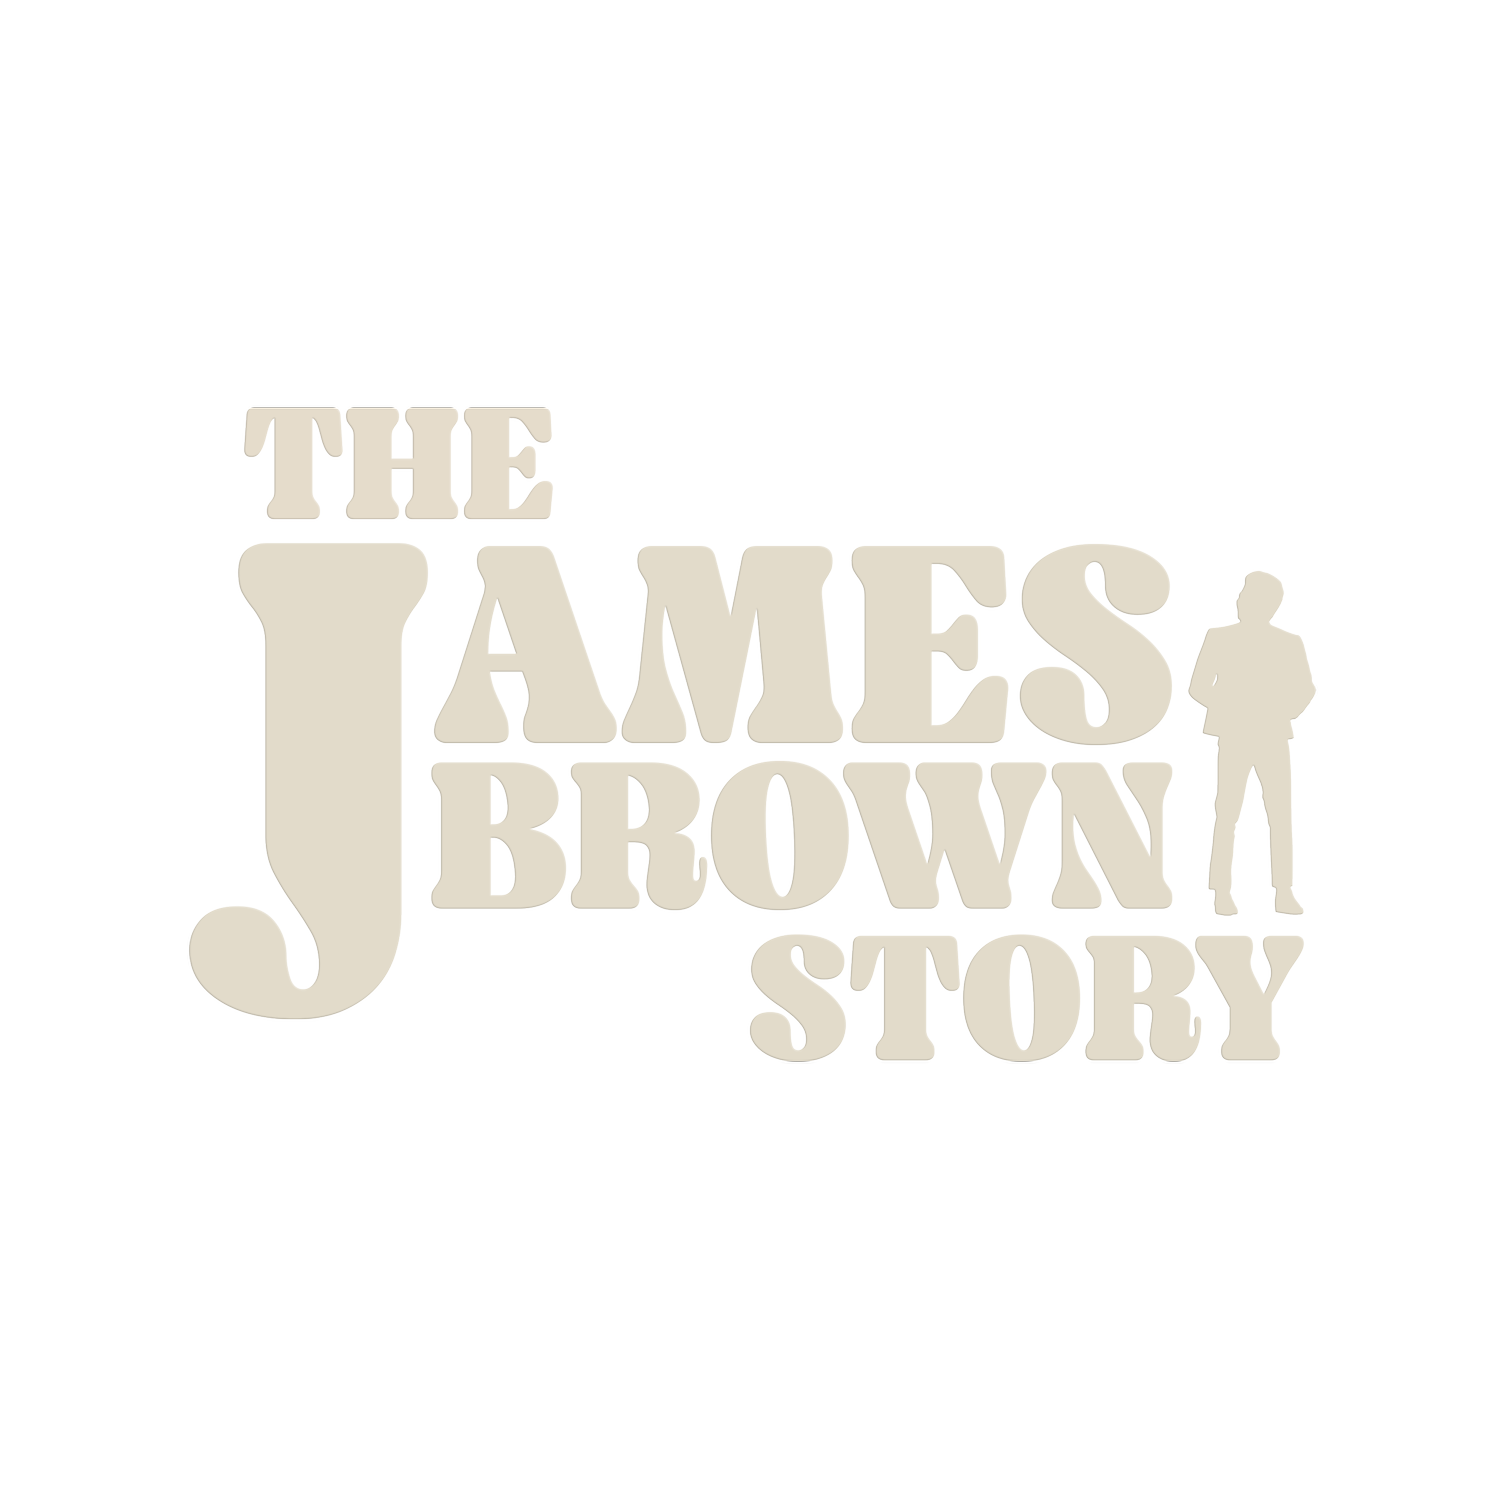 The James Brown Story